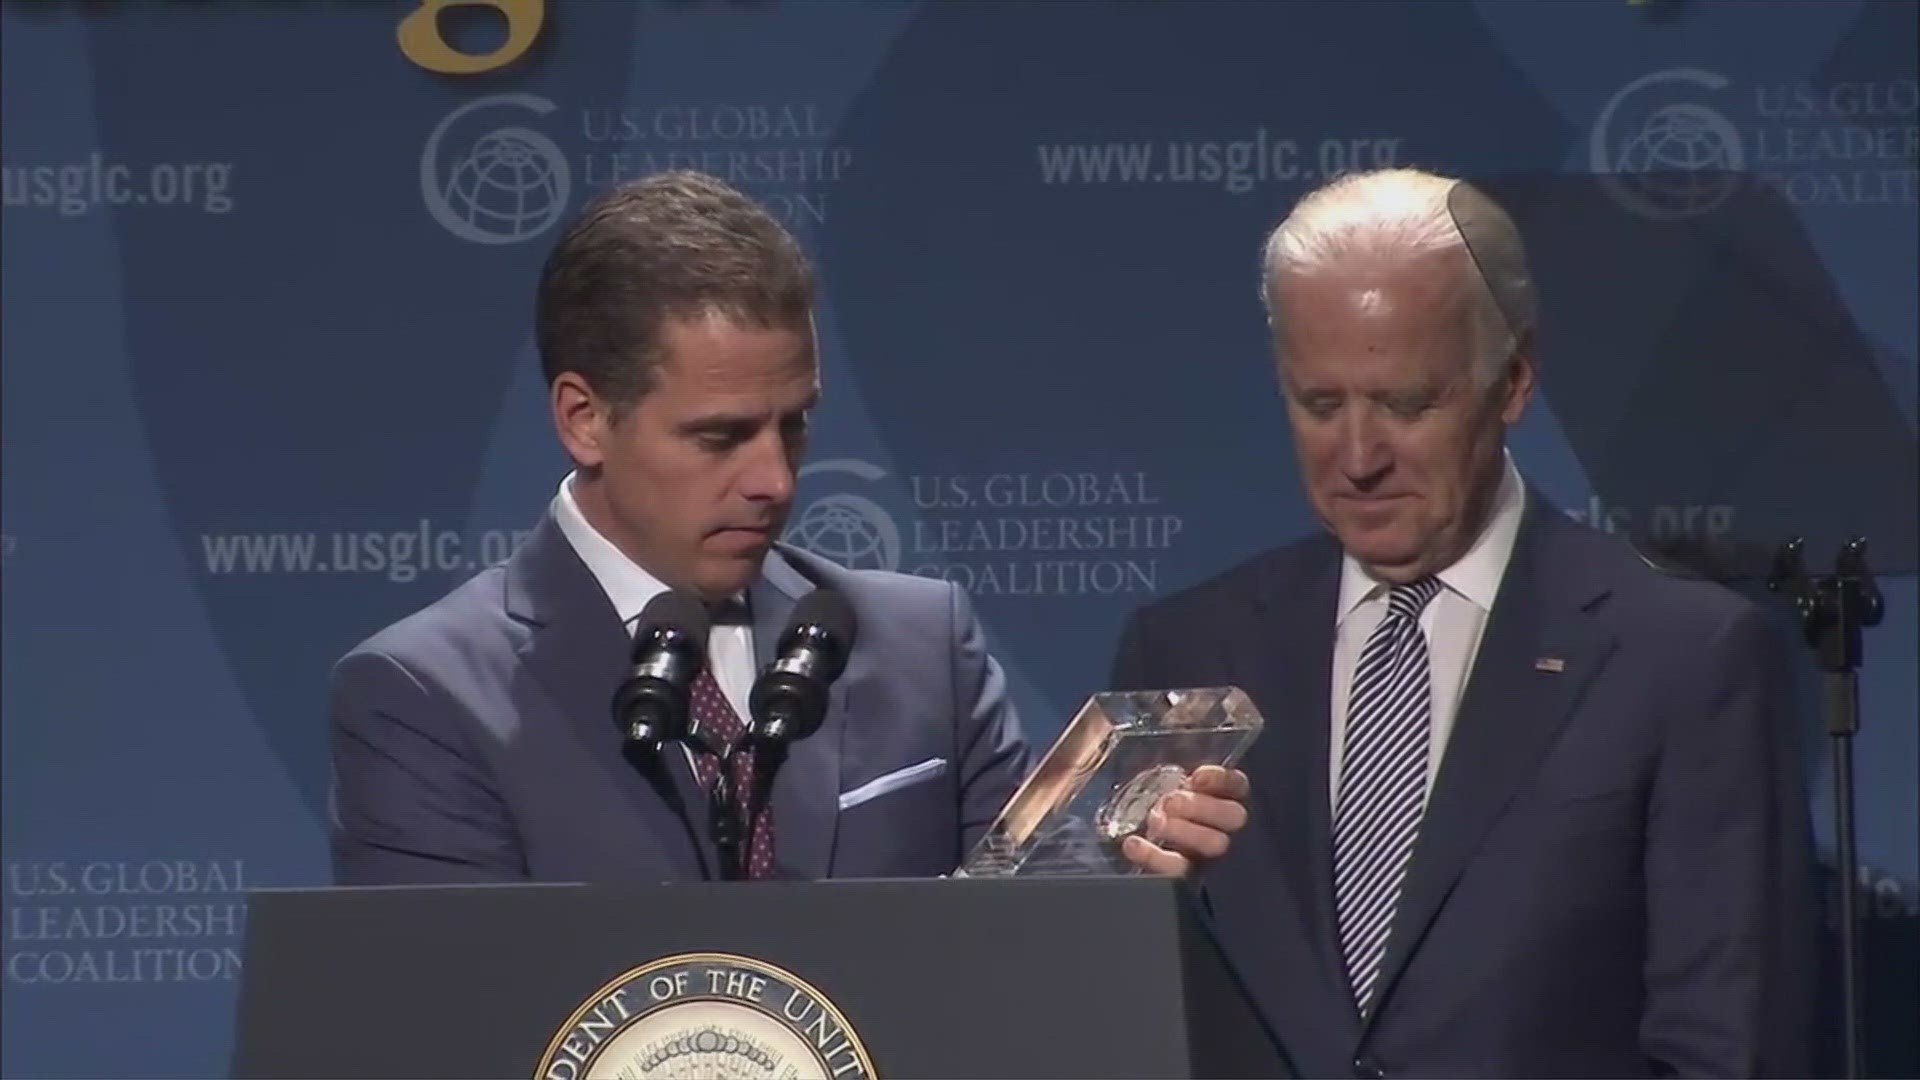 Hunter Biden is accused of lying about drug use when he bought a firearm in Oct. 2018, a period when he has acknowledged struggling with addiction to crack cocaine.